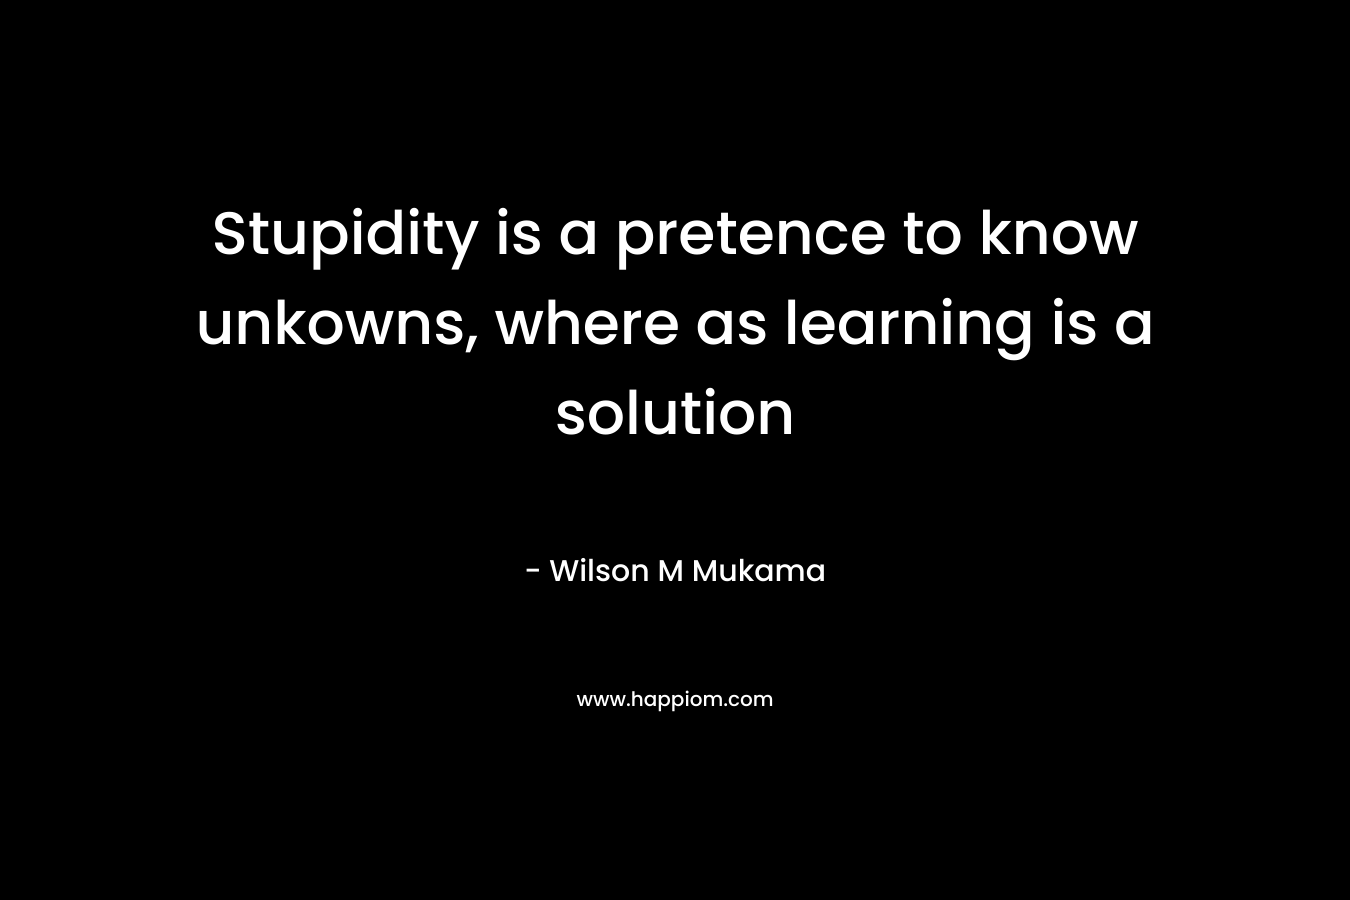 Stupidity is a pretence to know unkowns, where as learning is a solution